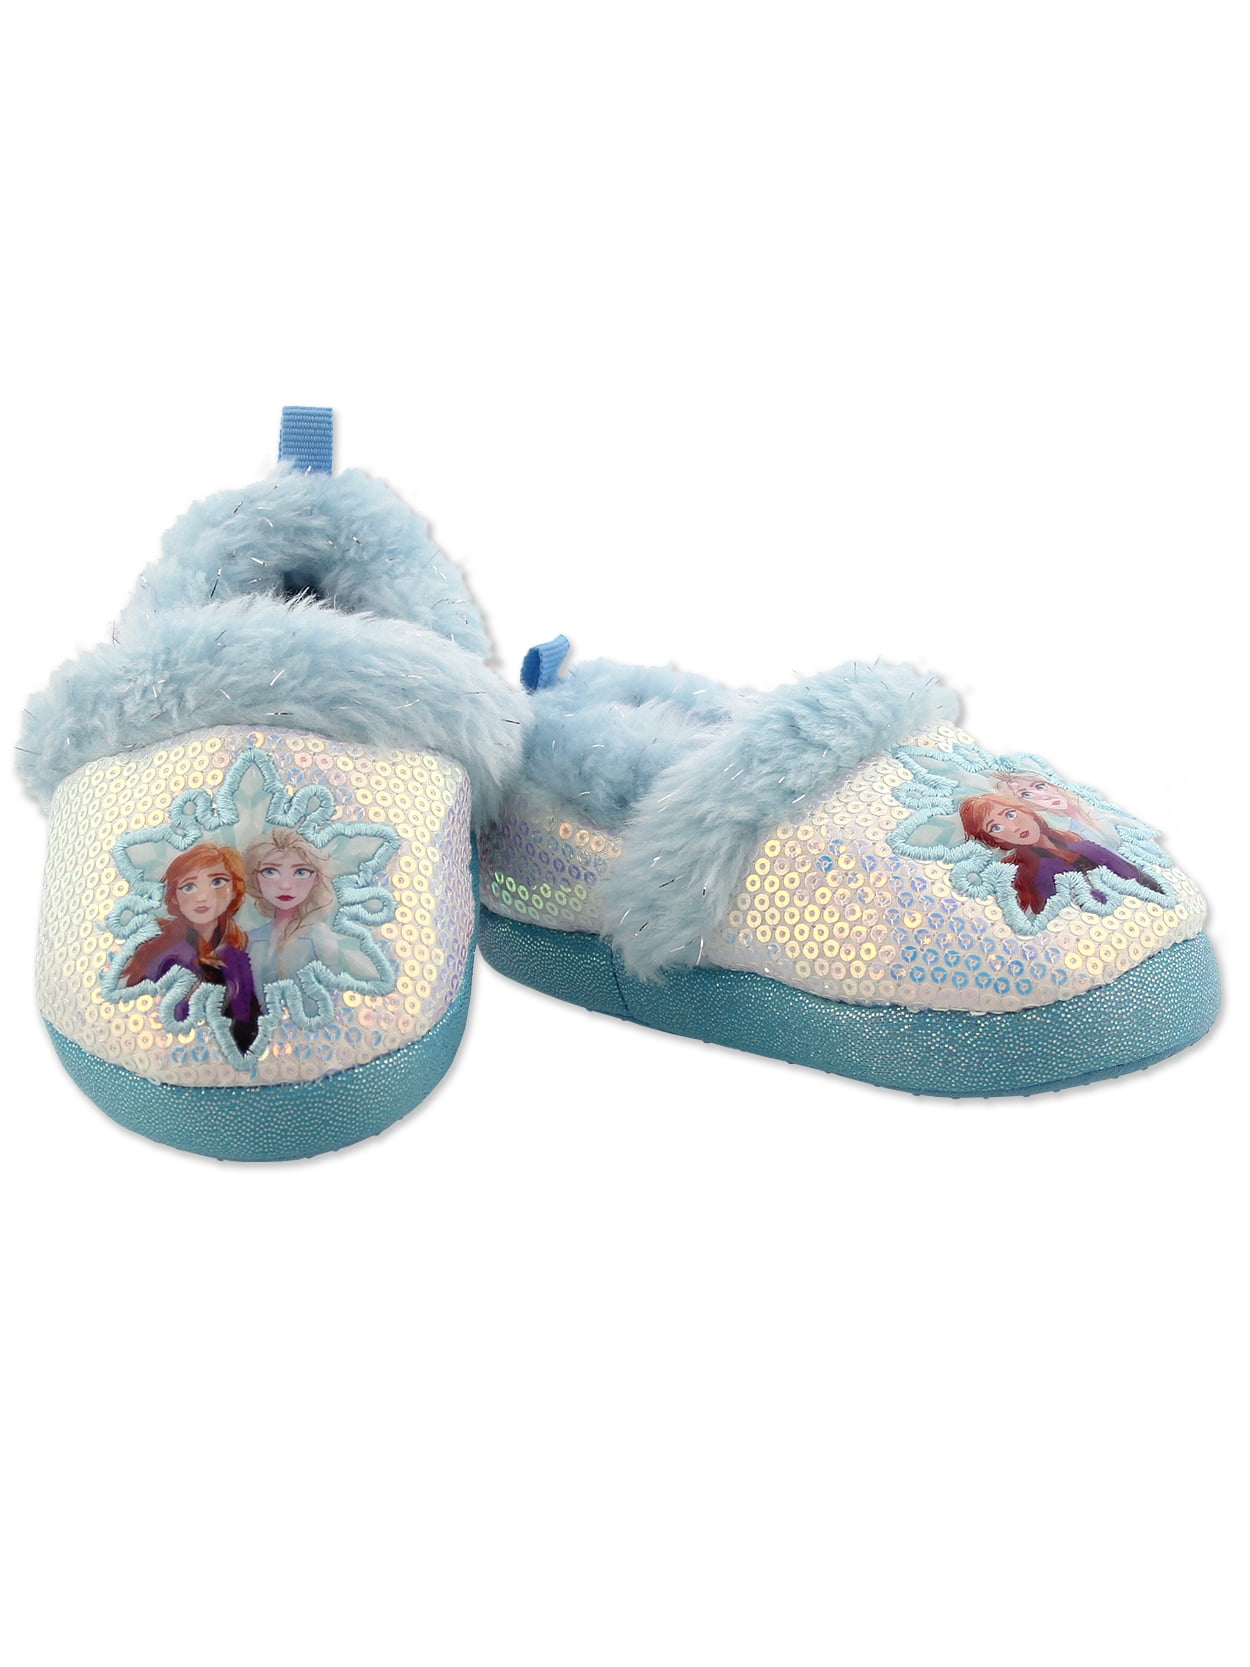 Disney Authentic Princess Soft Slippers for Kids Size 7/8 9/10 11/12 13/1 2/3 